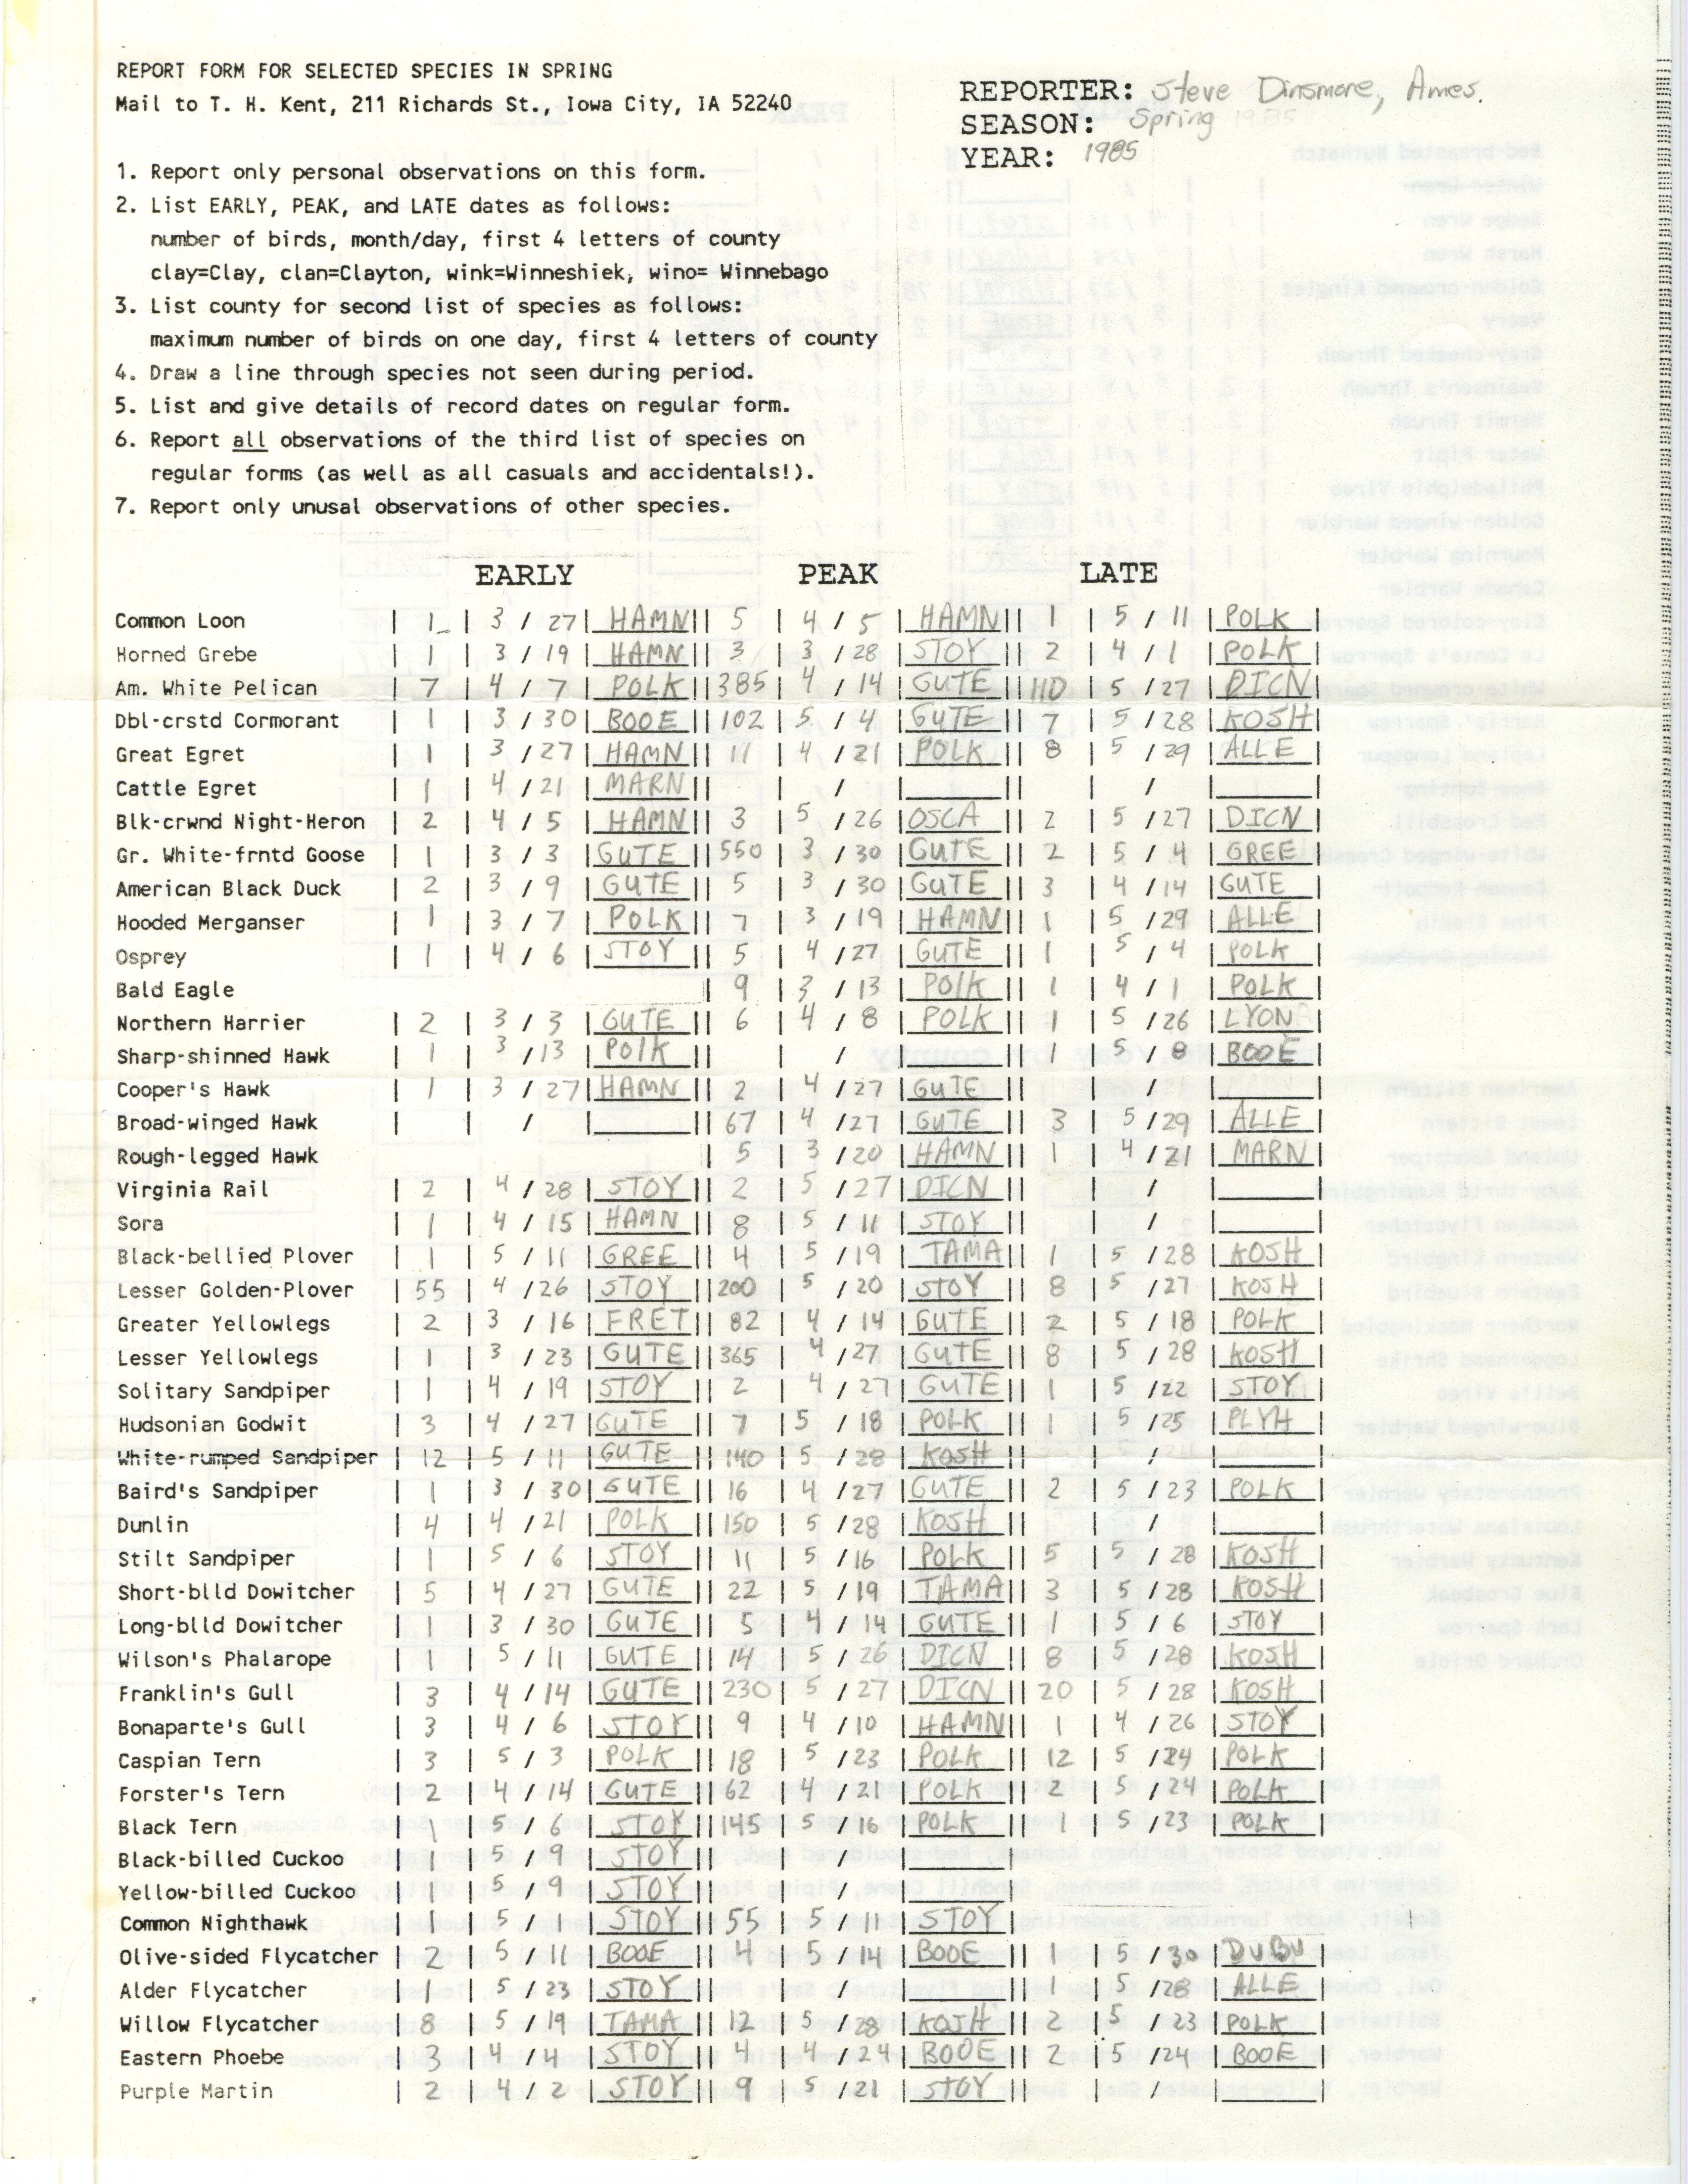 Report form for selected species in spring, contributed by Stephen J. Dinsmore, spring 1985